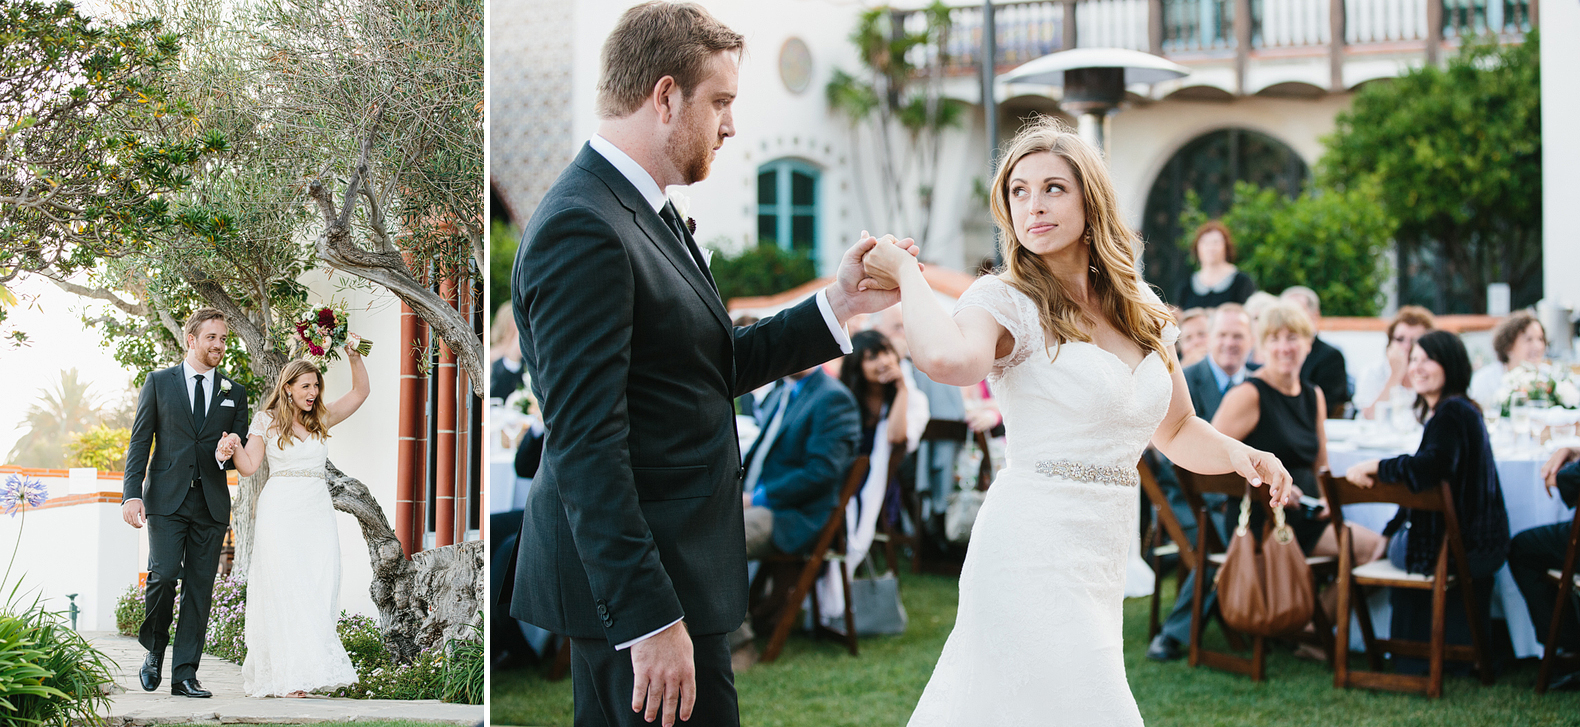 These are photos from Alix and Matt's grand entrance and first dance.